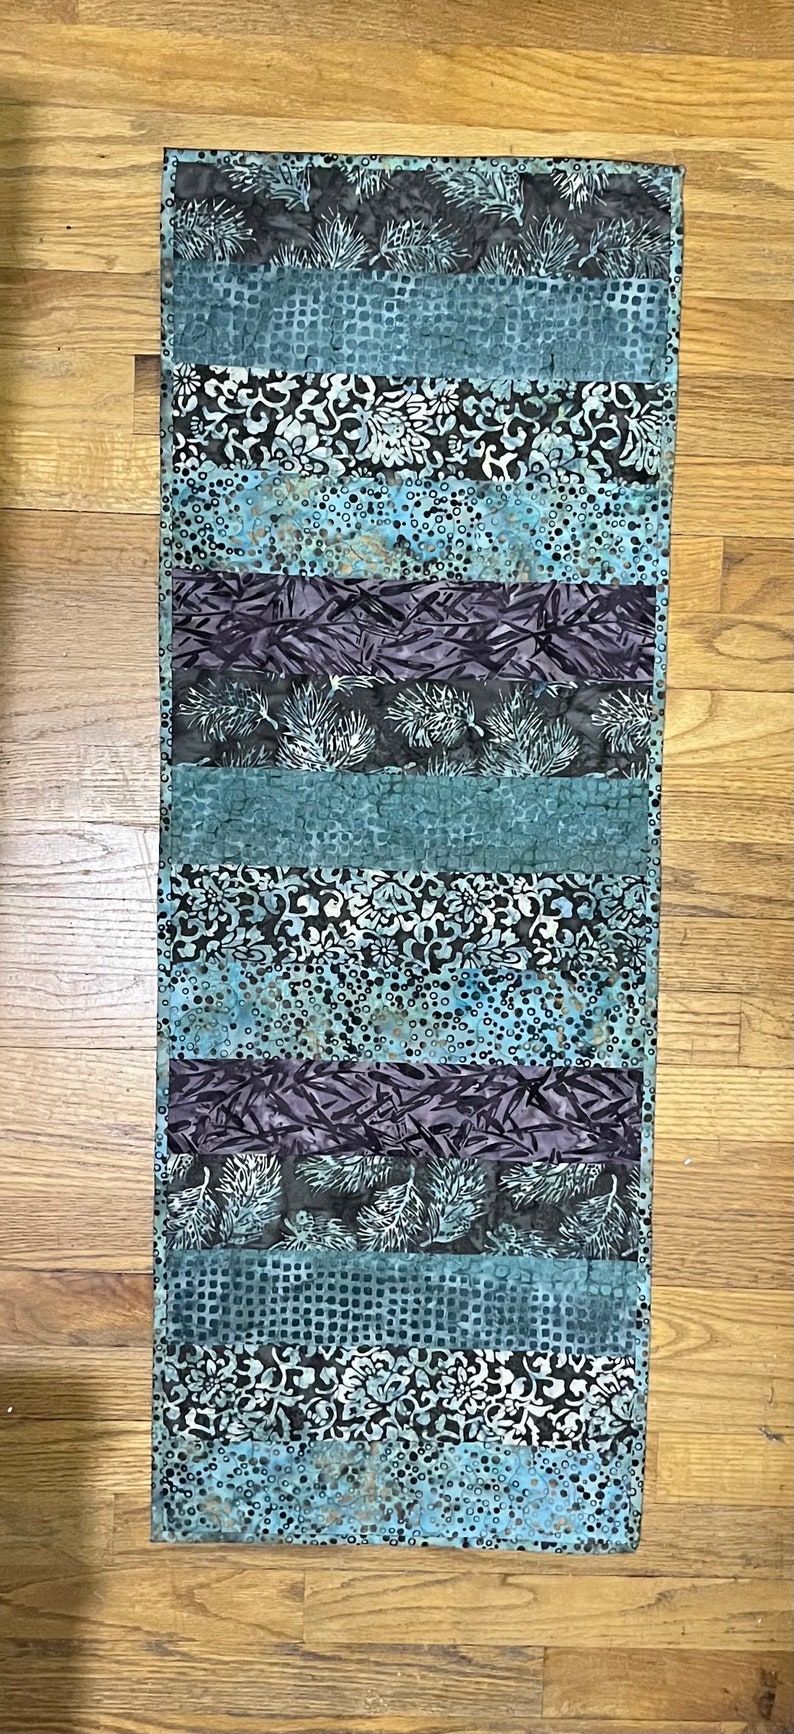 Quilted Table Runner in Green and Gray Printed Batiks image 2